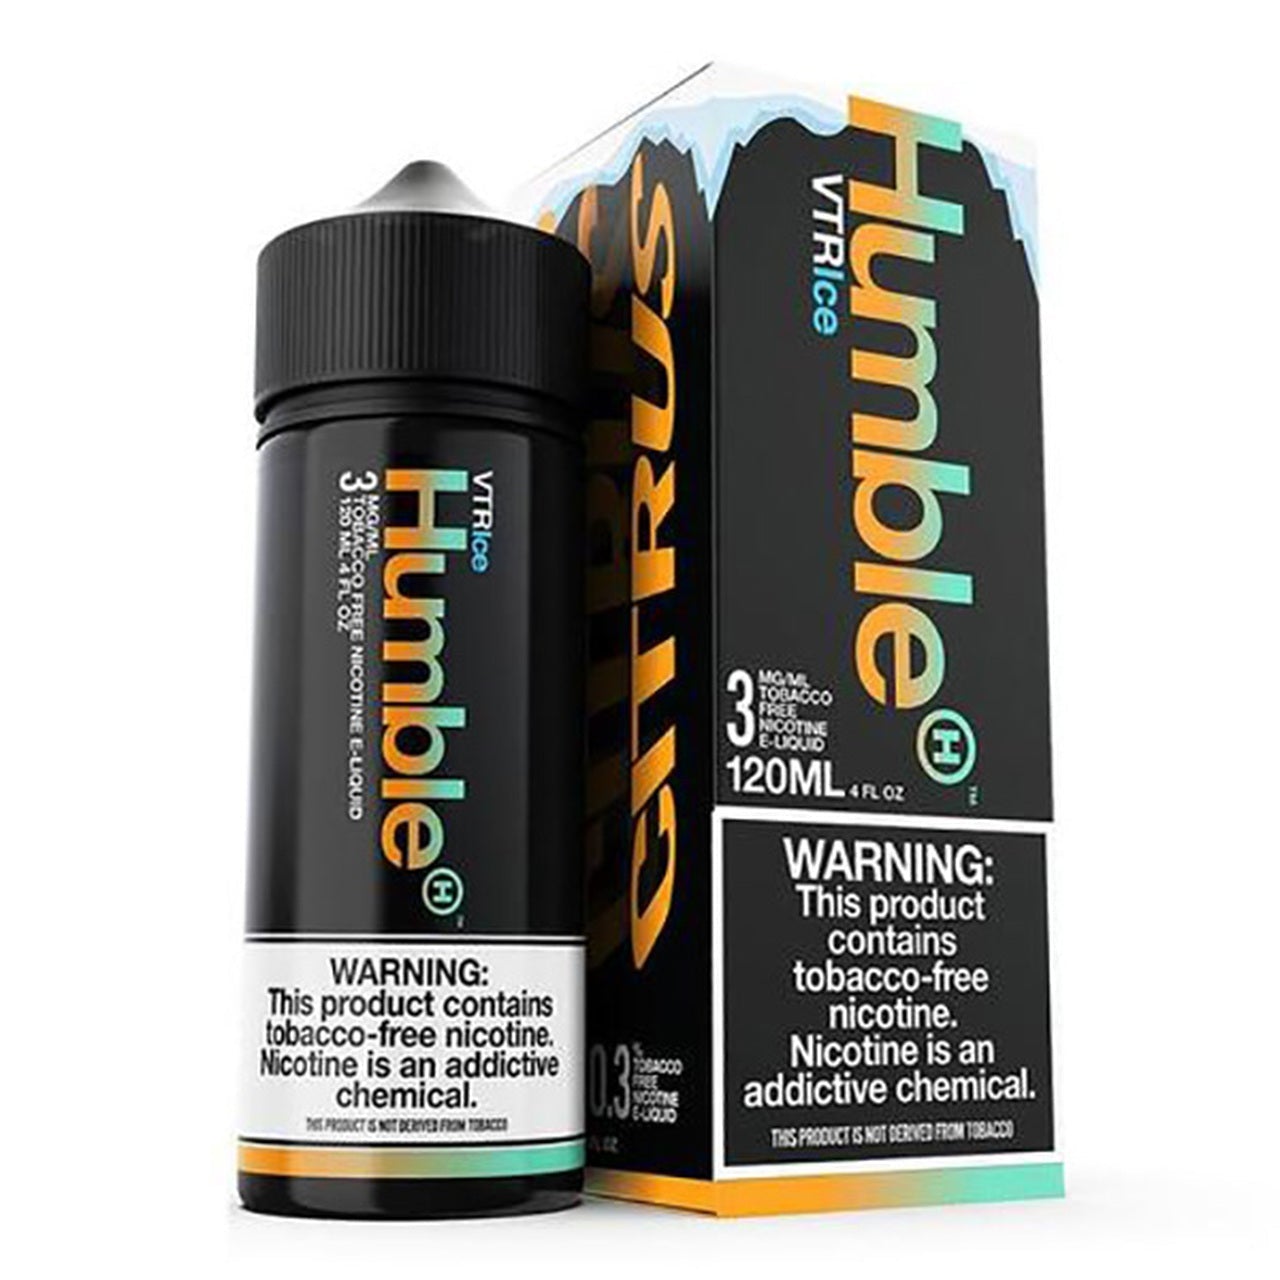 VTR Iced by Humble Tobacco-Free Nicotine Series 120mL with Packaging